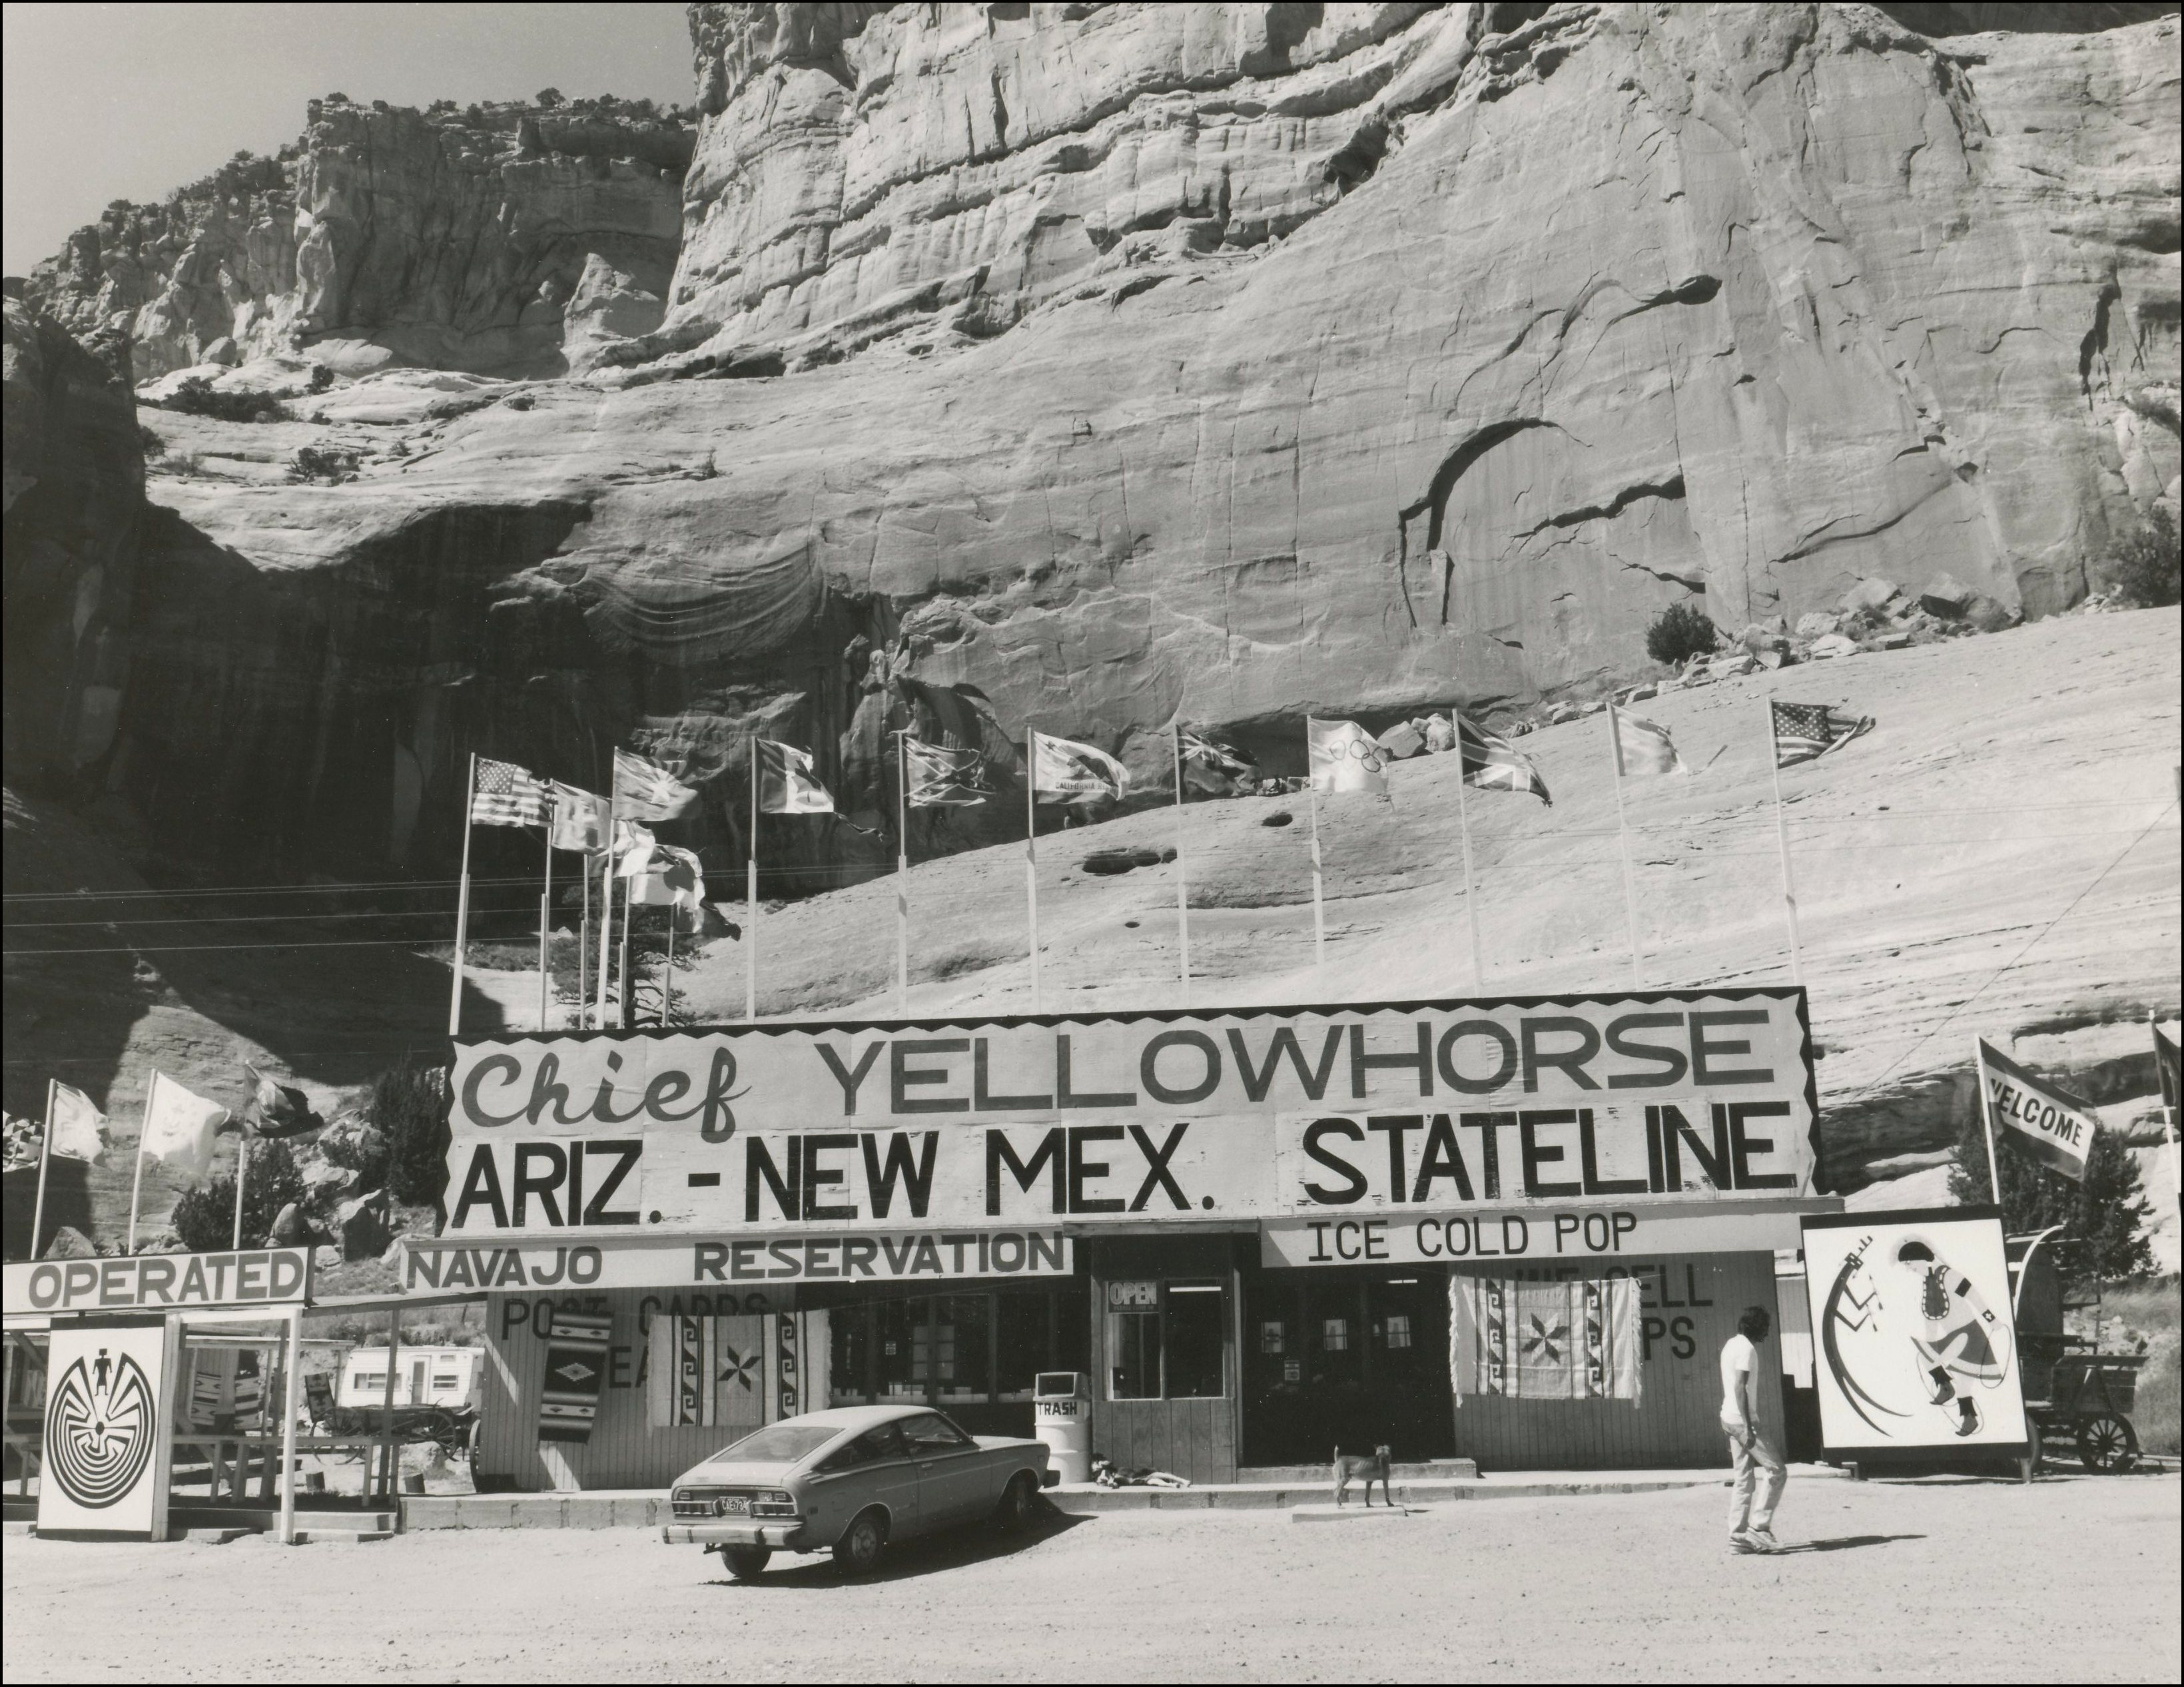 Road side stop store in foreground with flags and says Chief Yellowhorse, Ariz- New Mex. Stateline, Navajo reservation, ice cold pop. Large cliffs behind it.